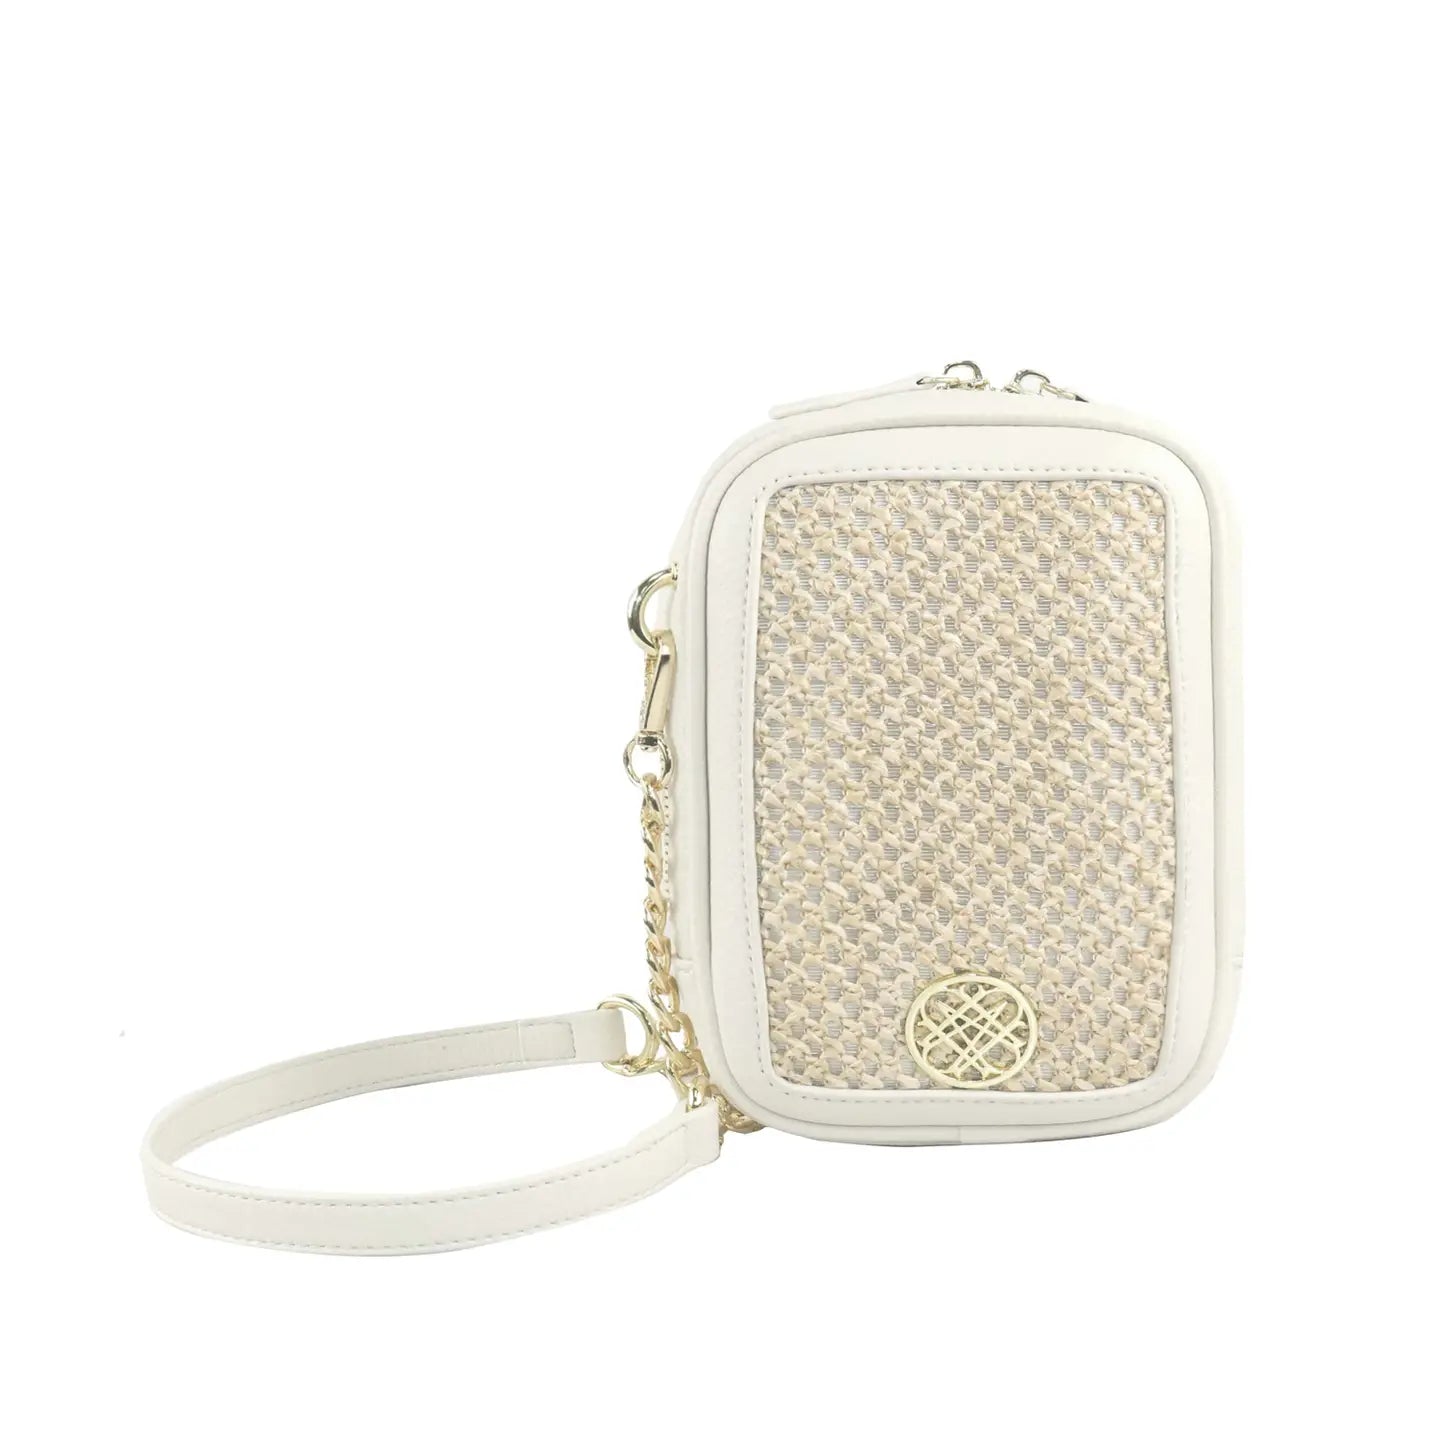 Natalie Wood - Grace Crossbody in Cream/Straw-130 Accessories-Natalie Wood-July & June Women's Fashion Boutique Located in San Antonio, Texas